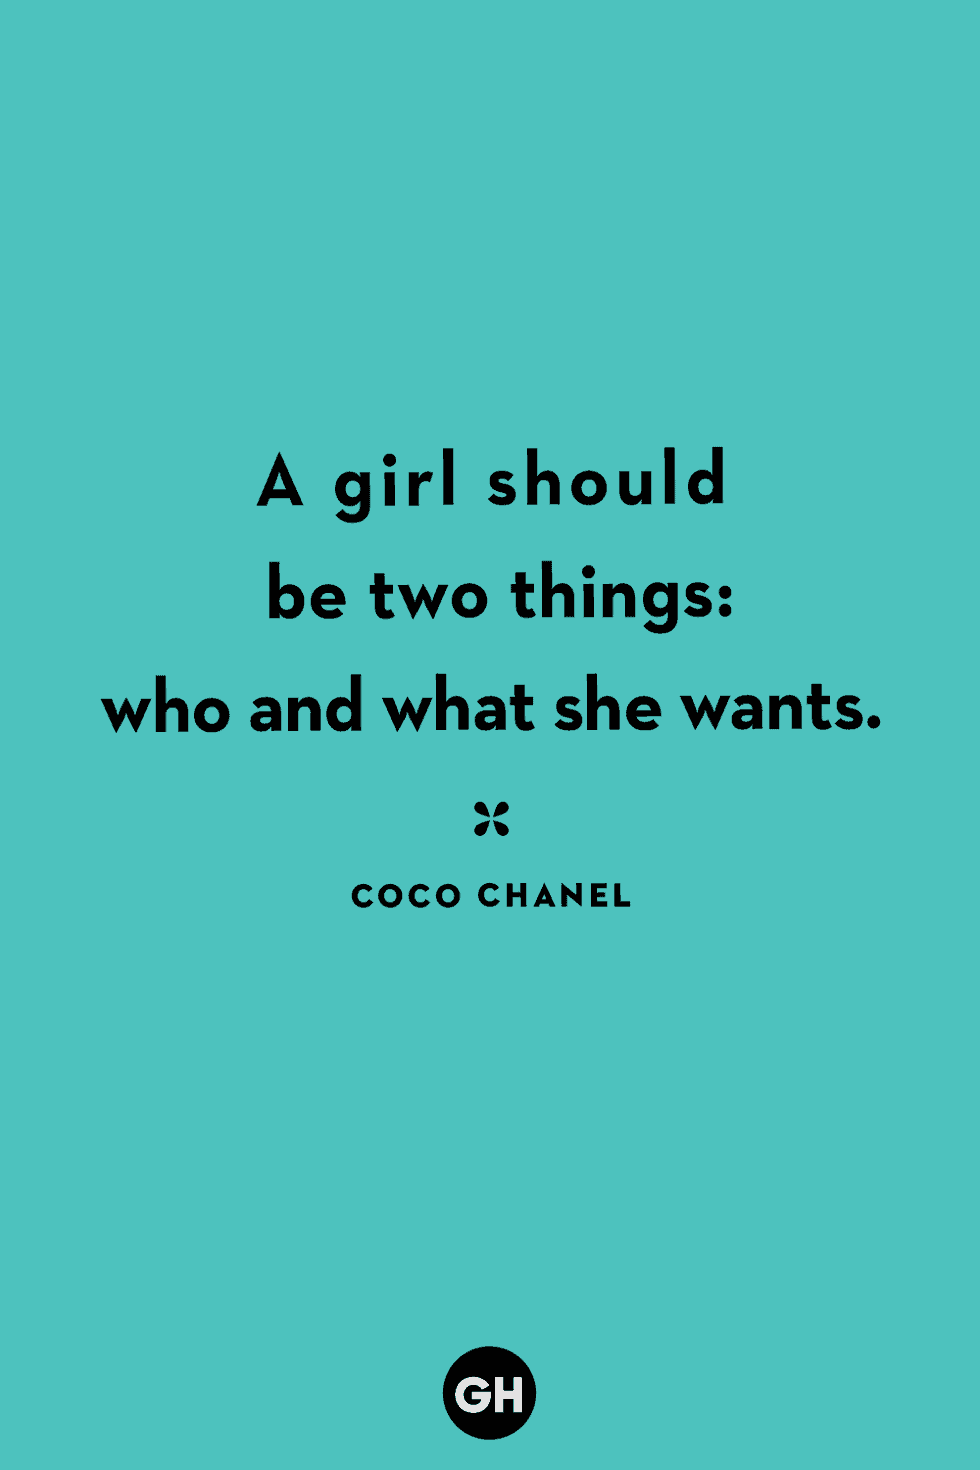 A girl should be two things - Inspirational Quote for Women